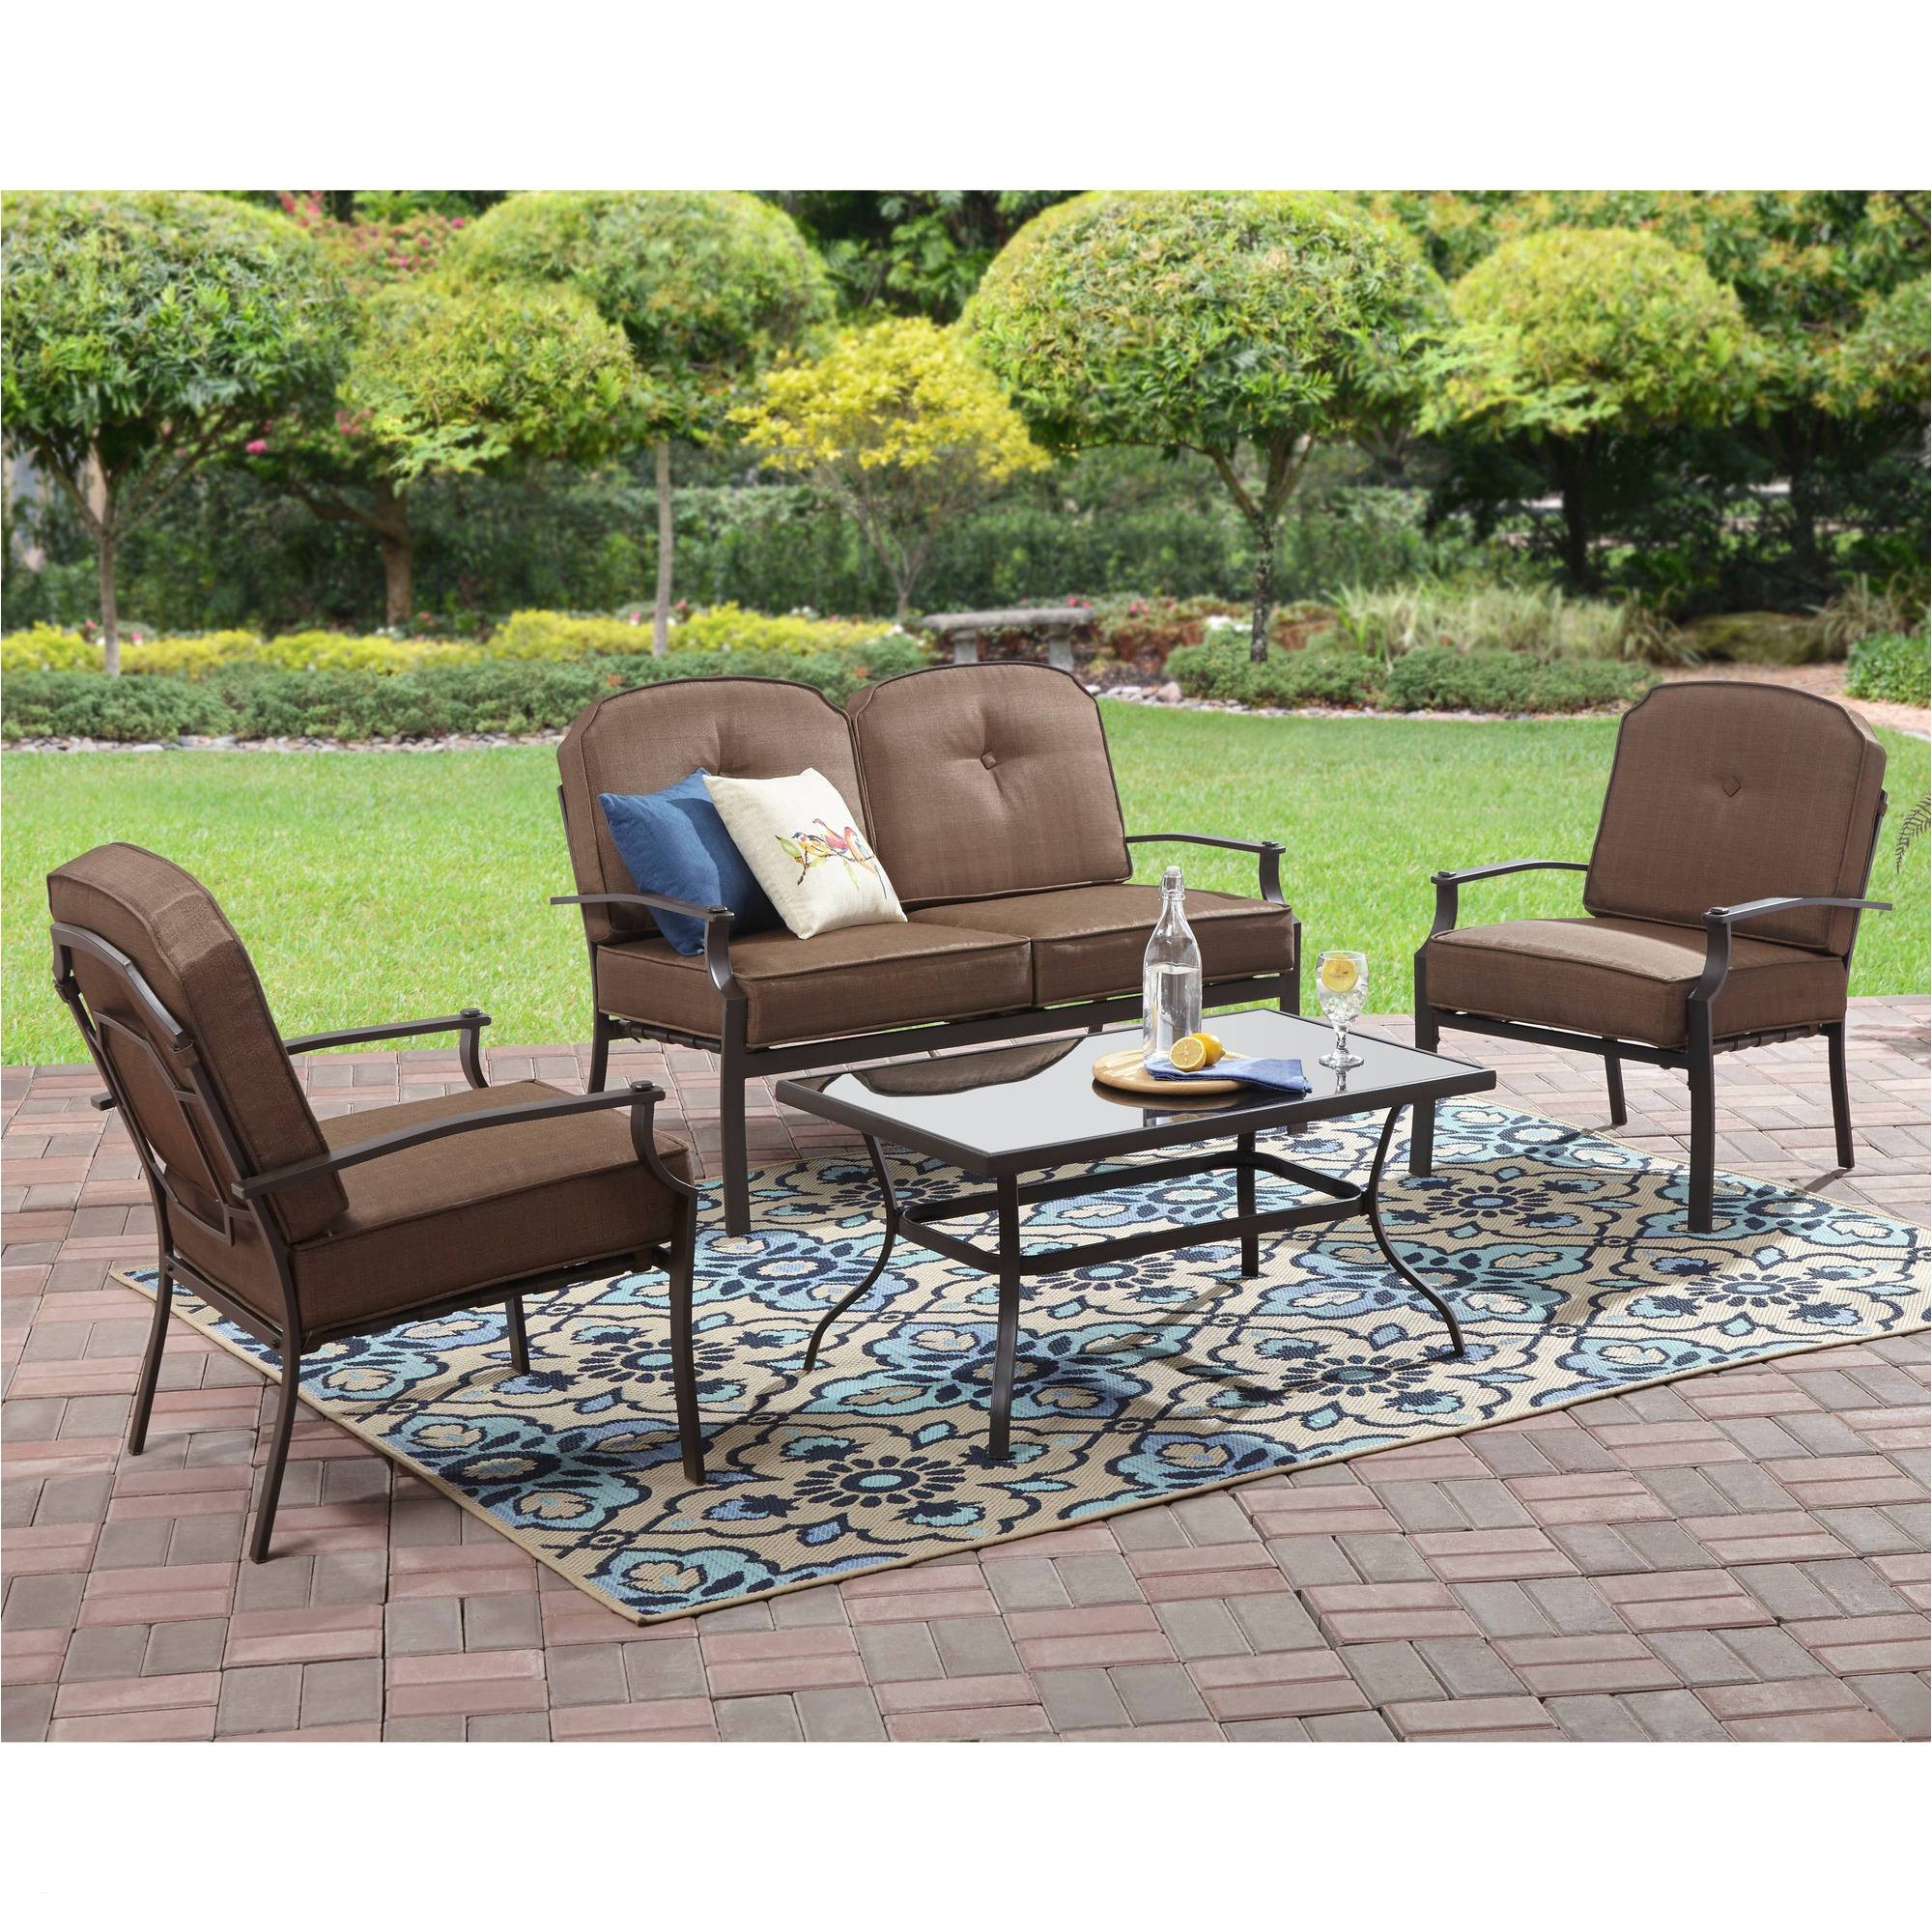 mainstay patio furniture wonderful big lots patio sets fresh chair concept of wegmans outdoor furniture